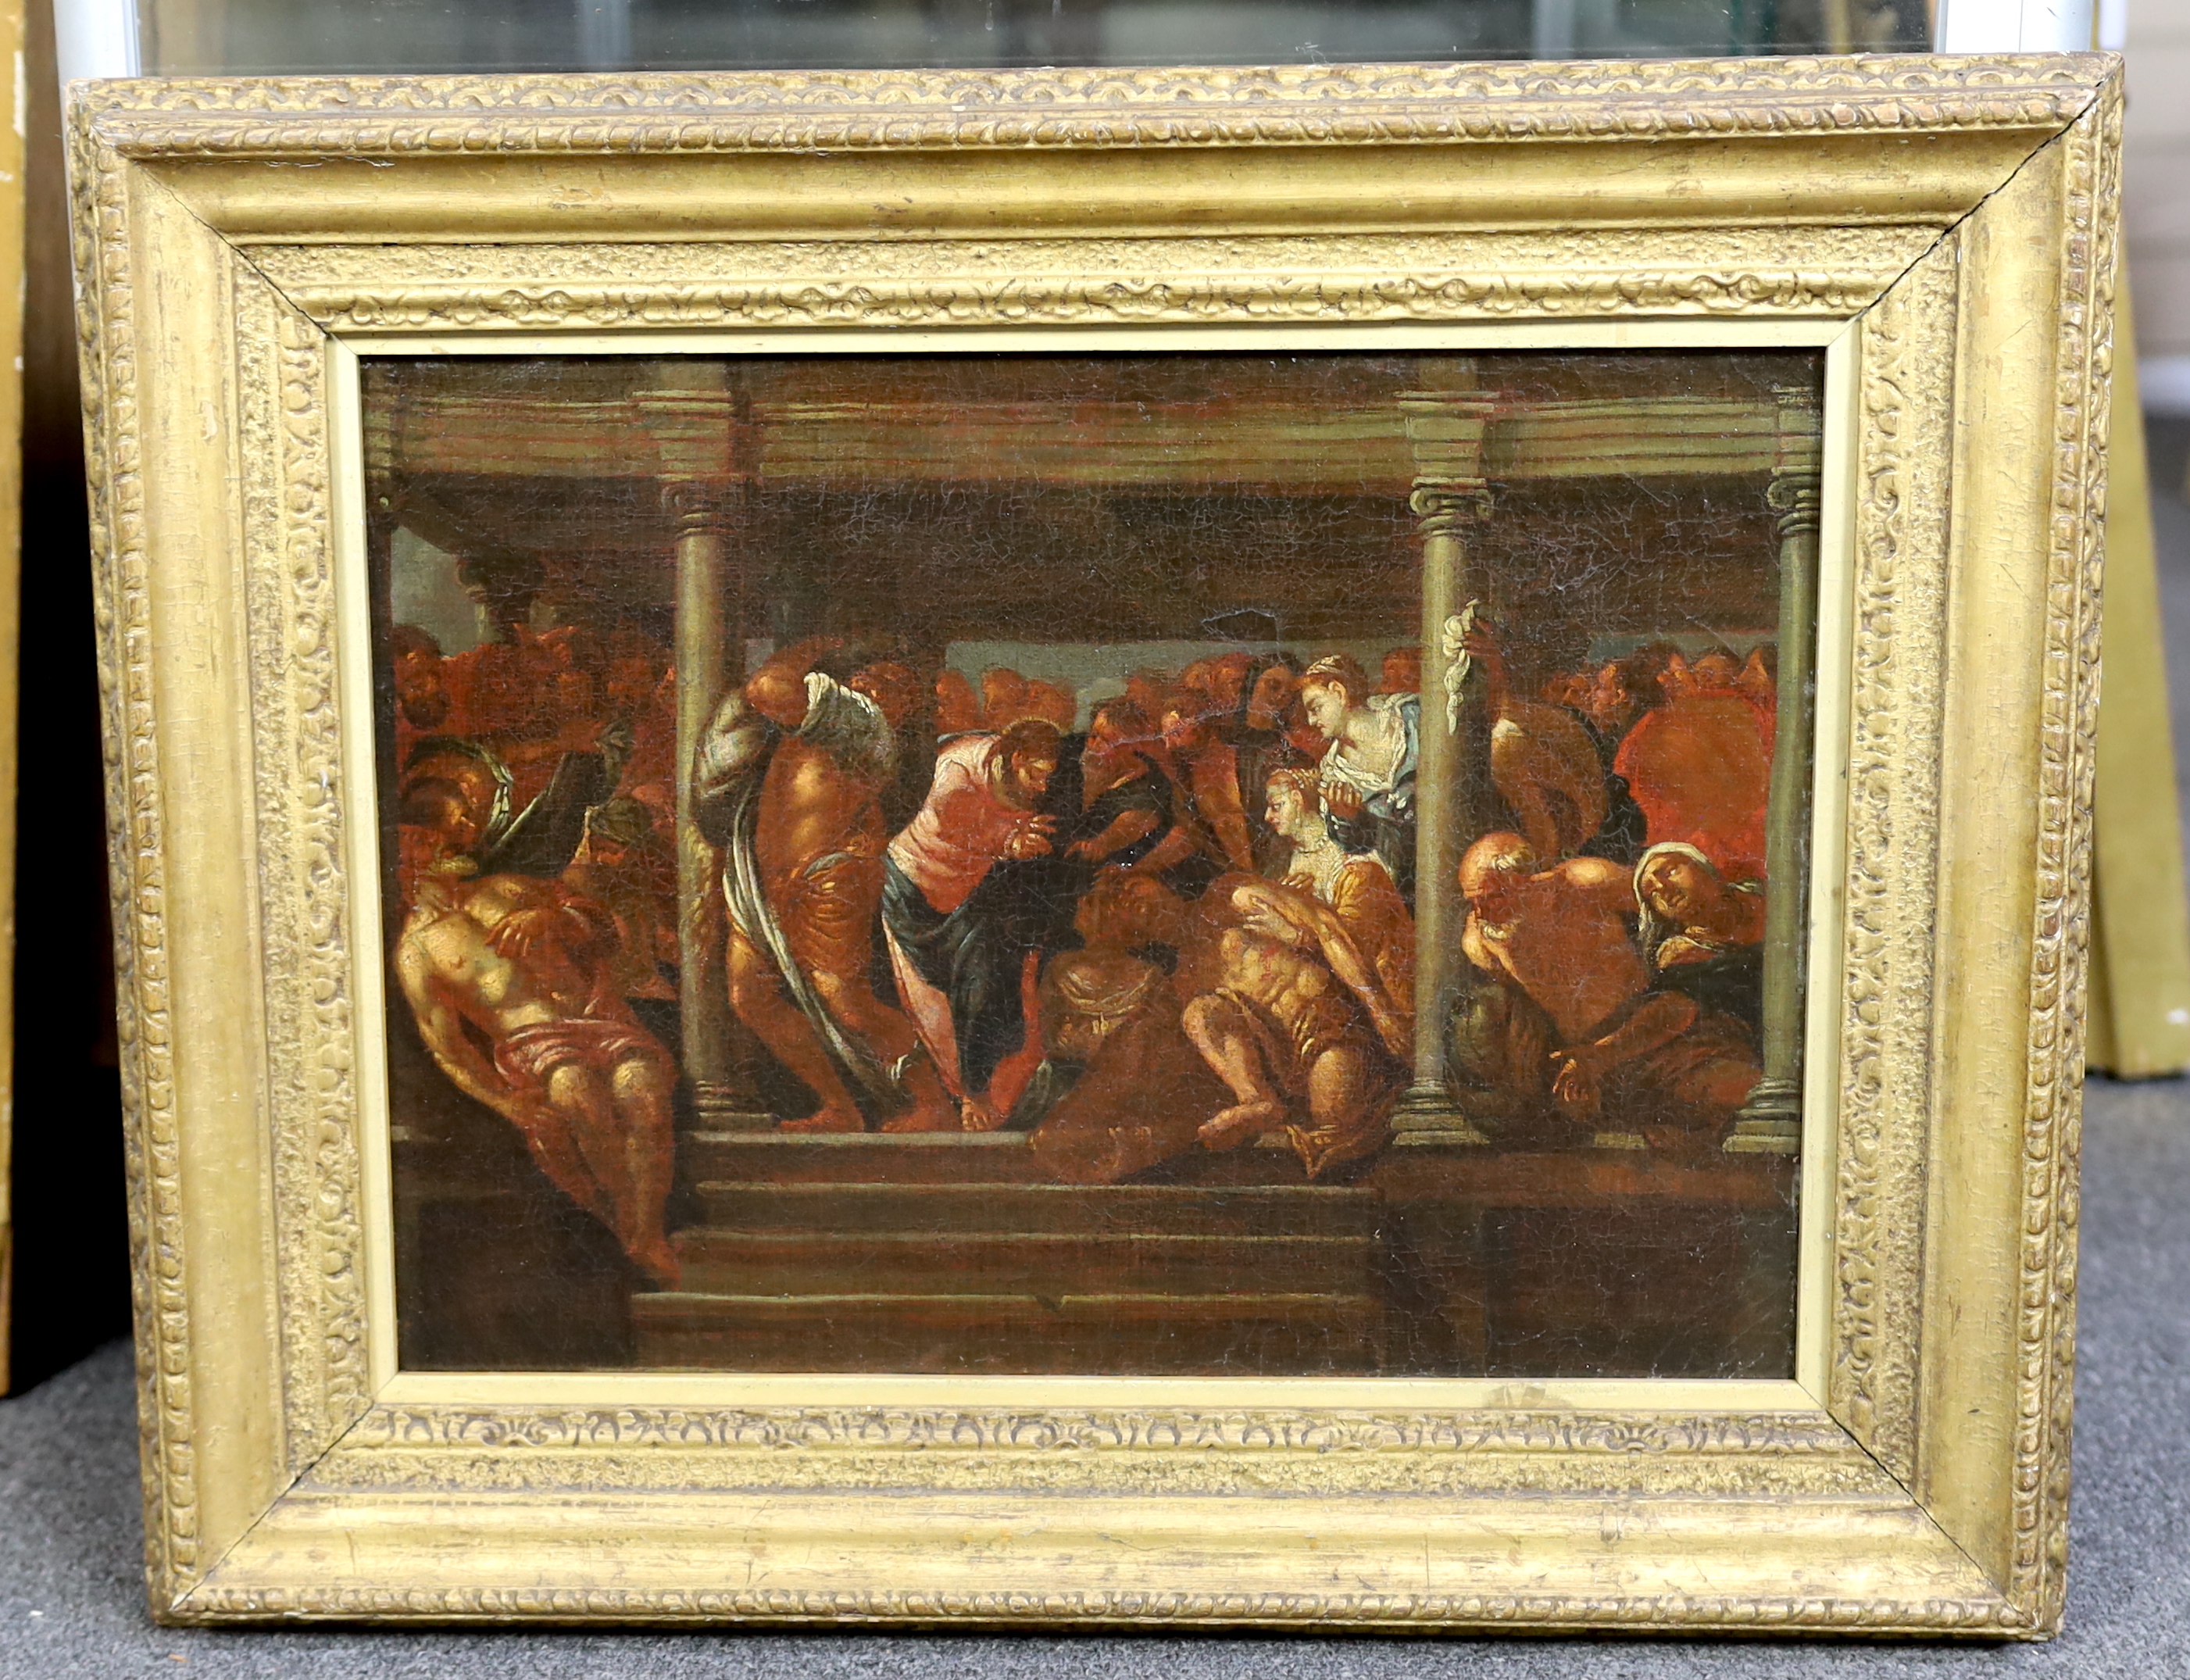 Attributed to Valentin Lefèvre (Flemish 1637-1677) after Jacopo Robusti called Tintoretto (Italian, 1518-1594), Piscina Probatica (or The Probatic Pool), oil on canvas, 32 x 43cm, sold with a copy of the engraving by Lef